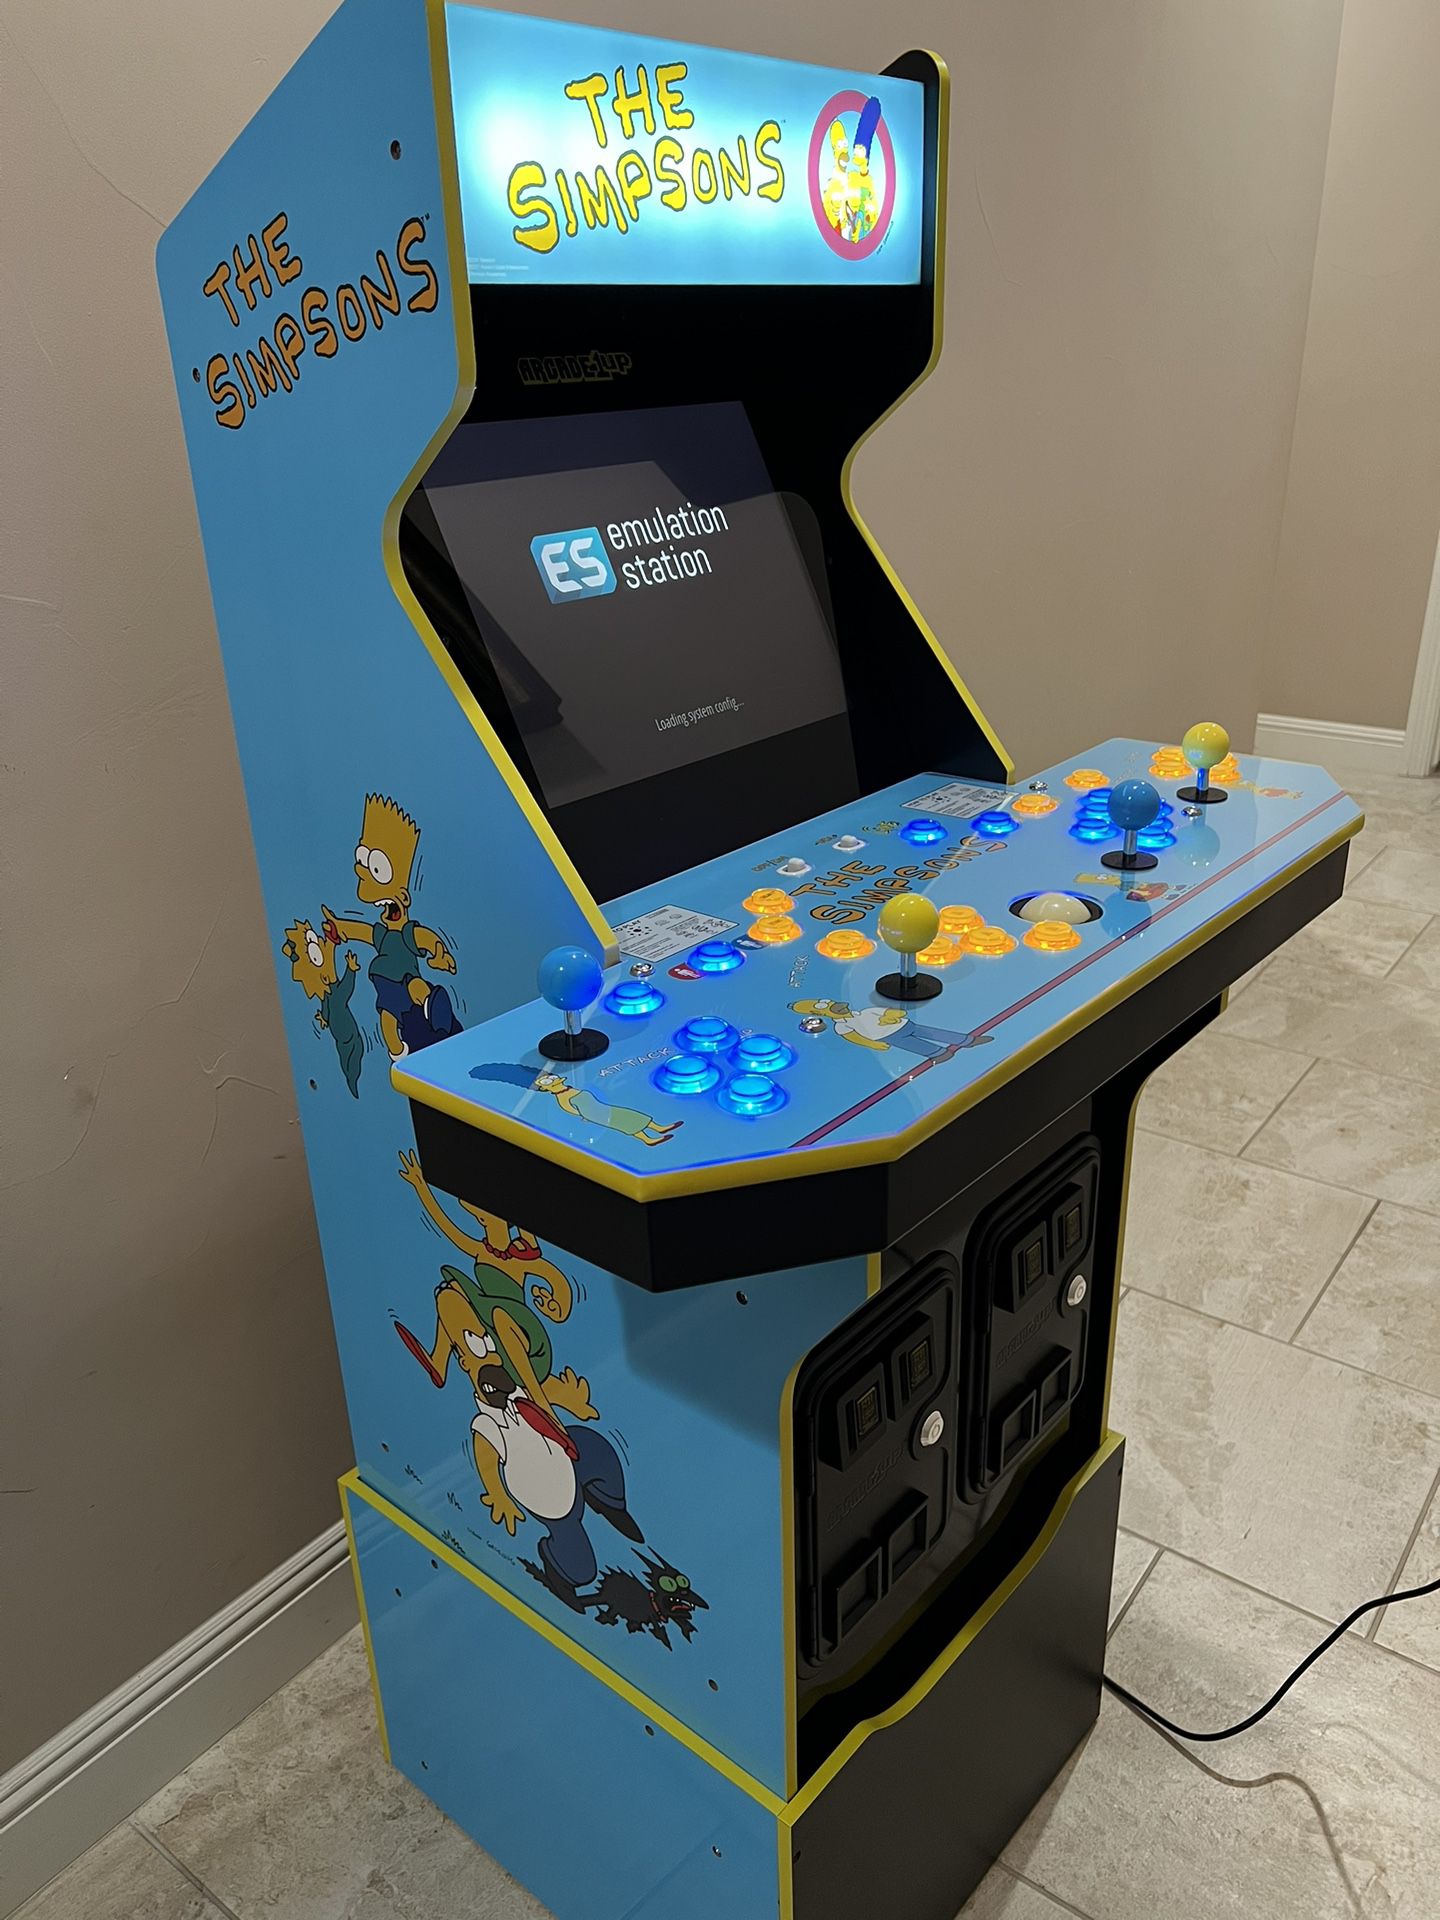 Arcade1Up Mod New Arcade The Simpsons With Over 33K+ Games